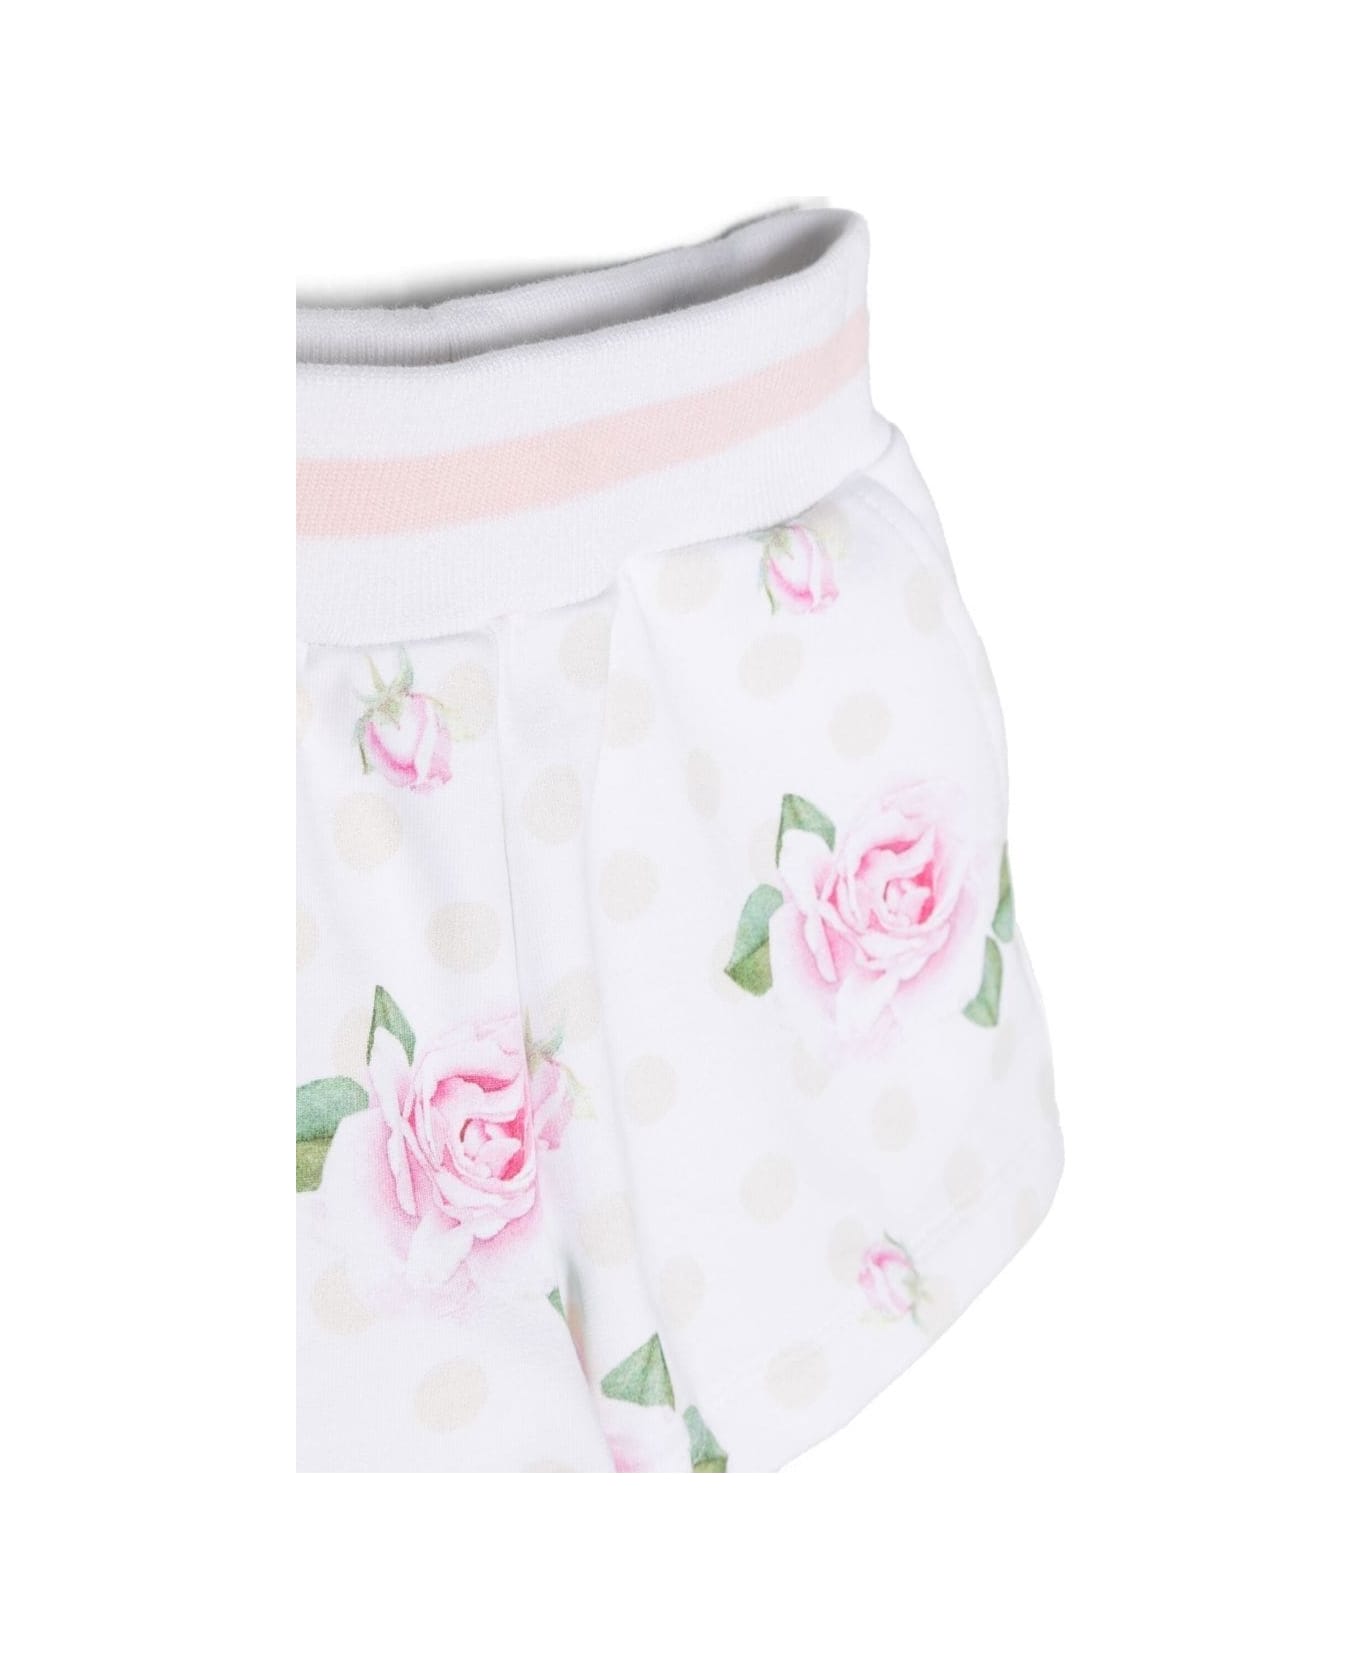 Monnalisa White Shorts With Elastic Waistband And Roses Print In Stretch Cotton Baby - Multicolor